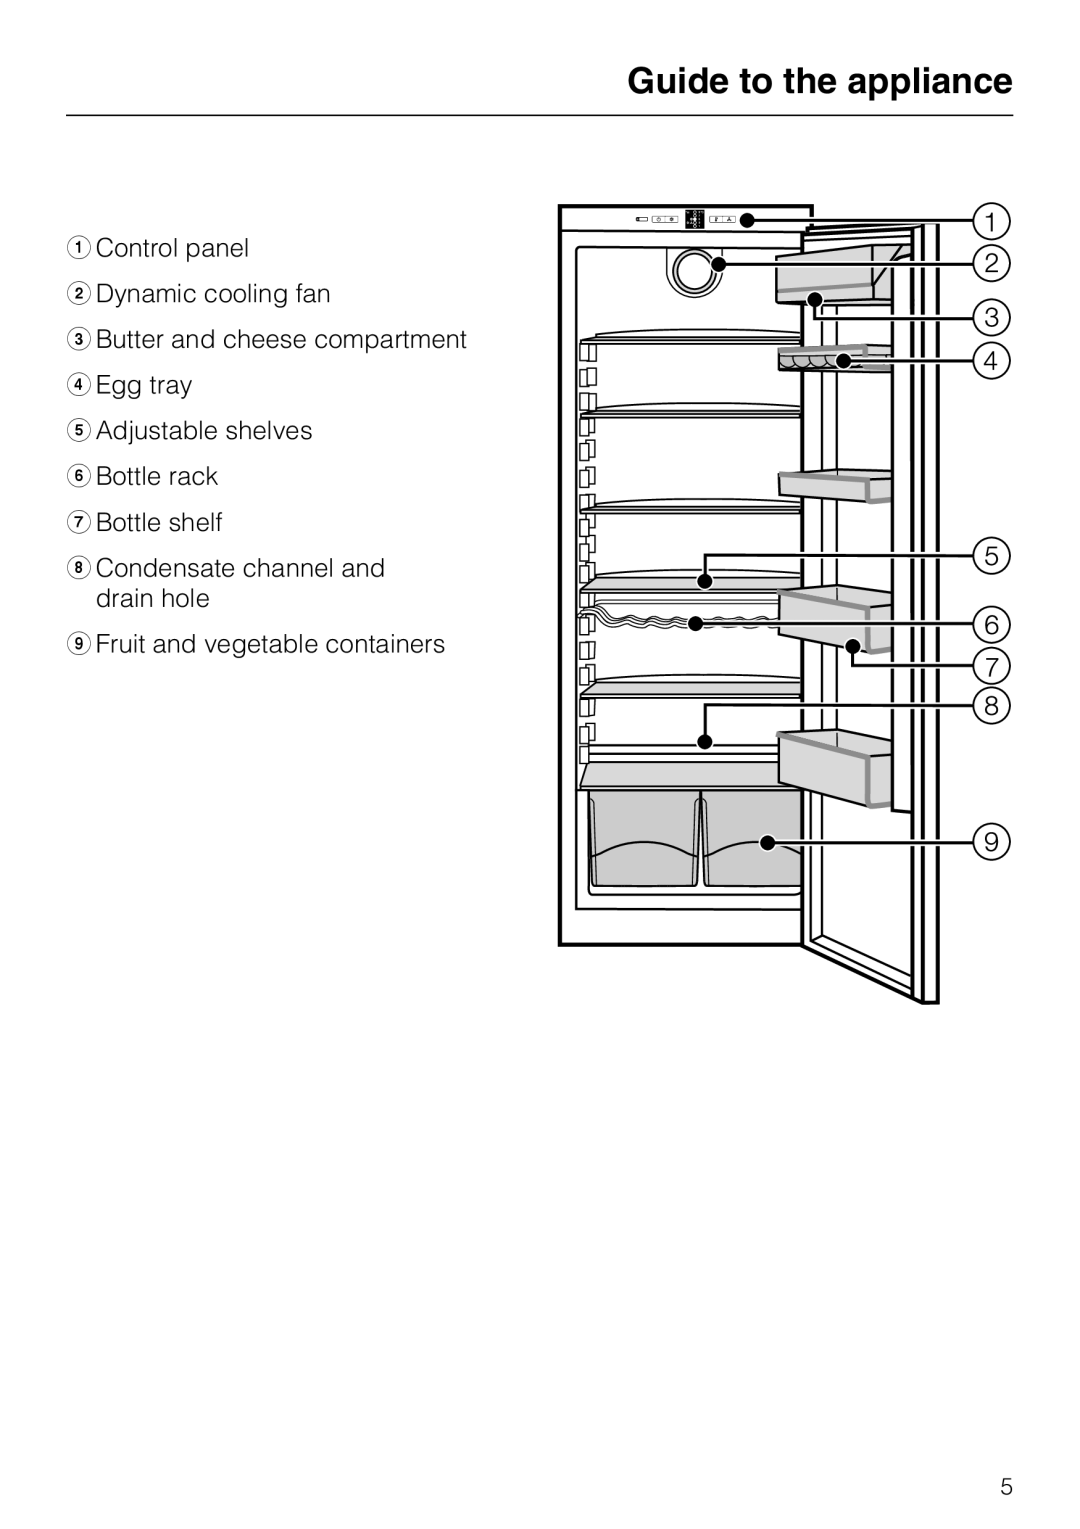 Miele K 12421 SD Guide to the appliance, aControl panel bDynamic cooling fan, cButter and cheese compartment dEgg tray 